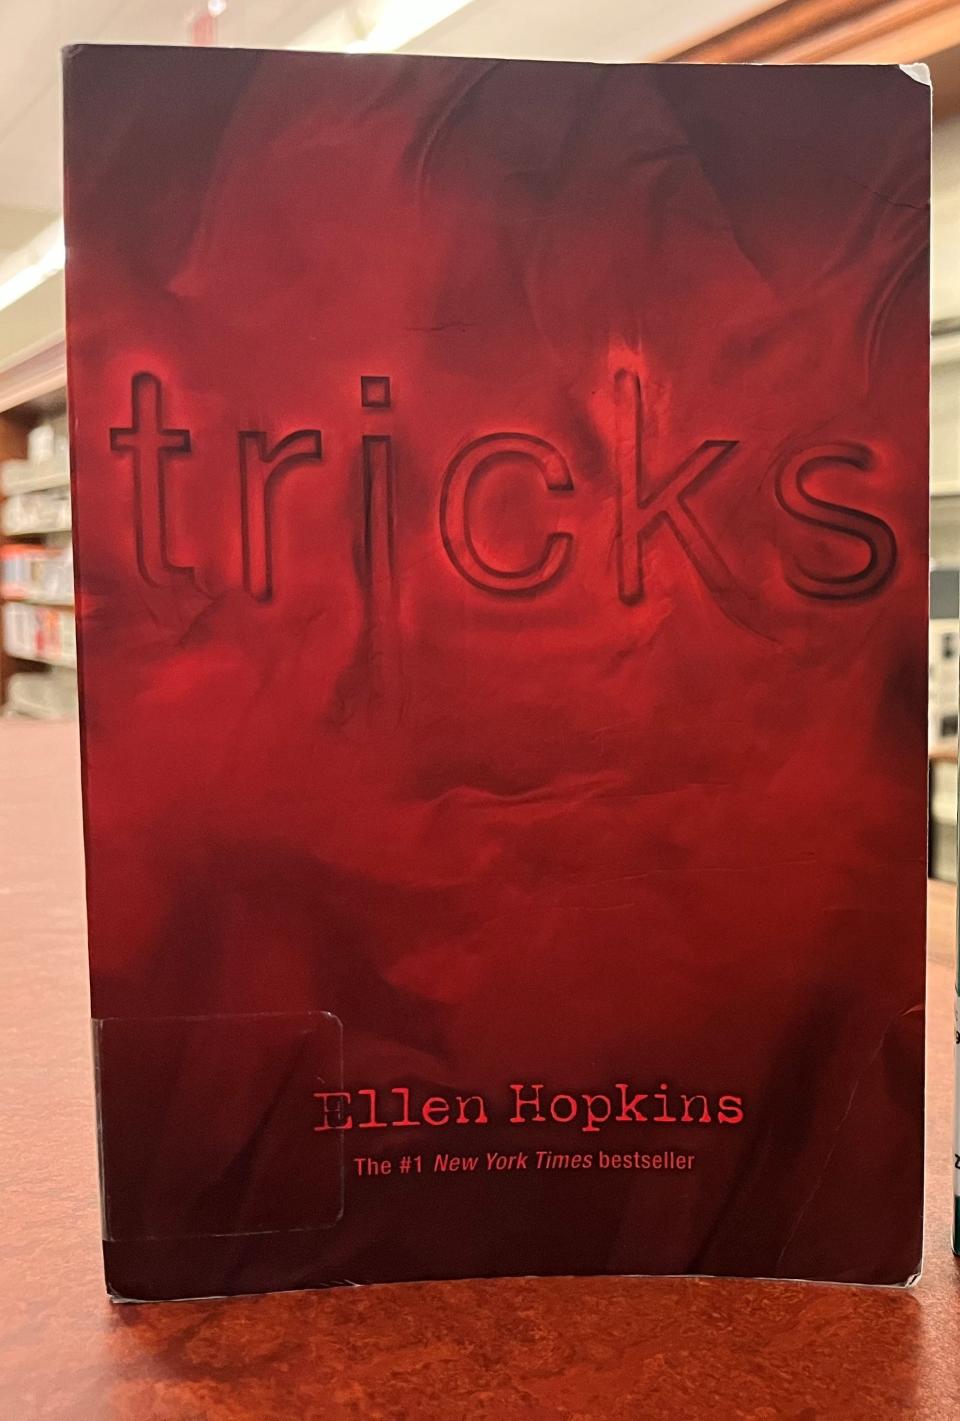 "Tricks" is one of the books removed by the Wilson County School Board after concerns were forwarded by a district book review committee.